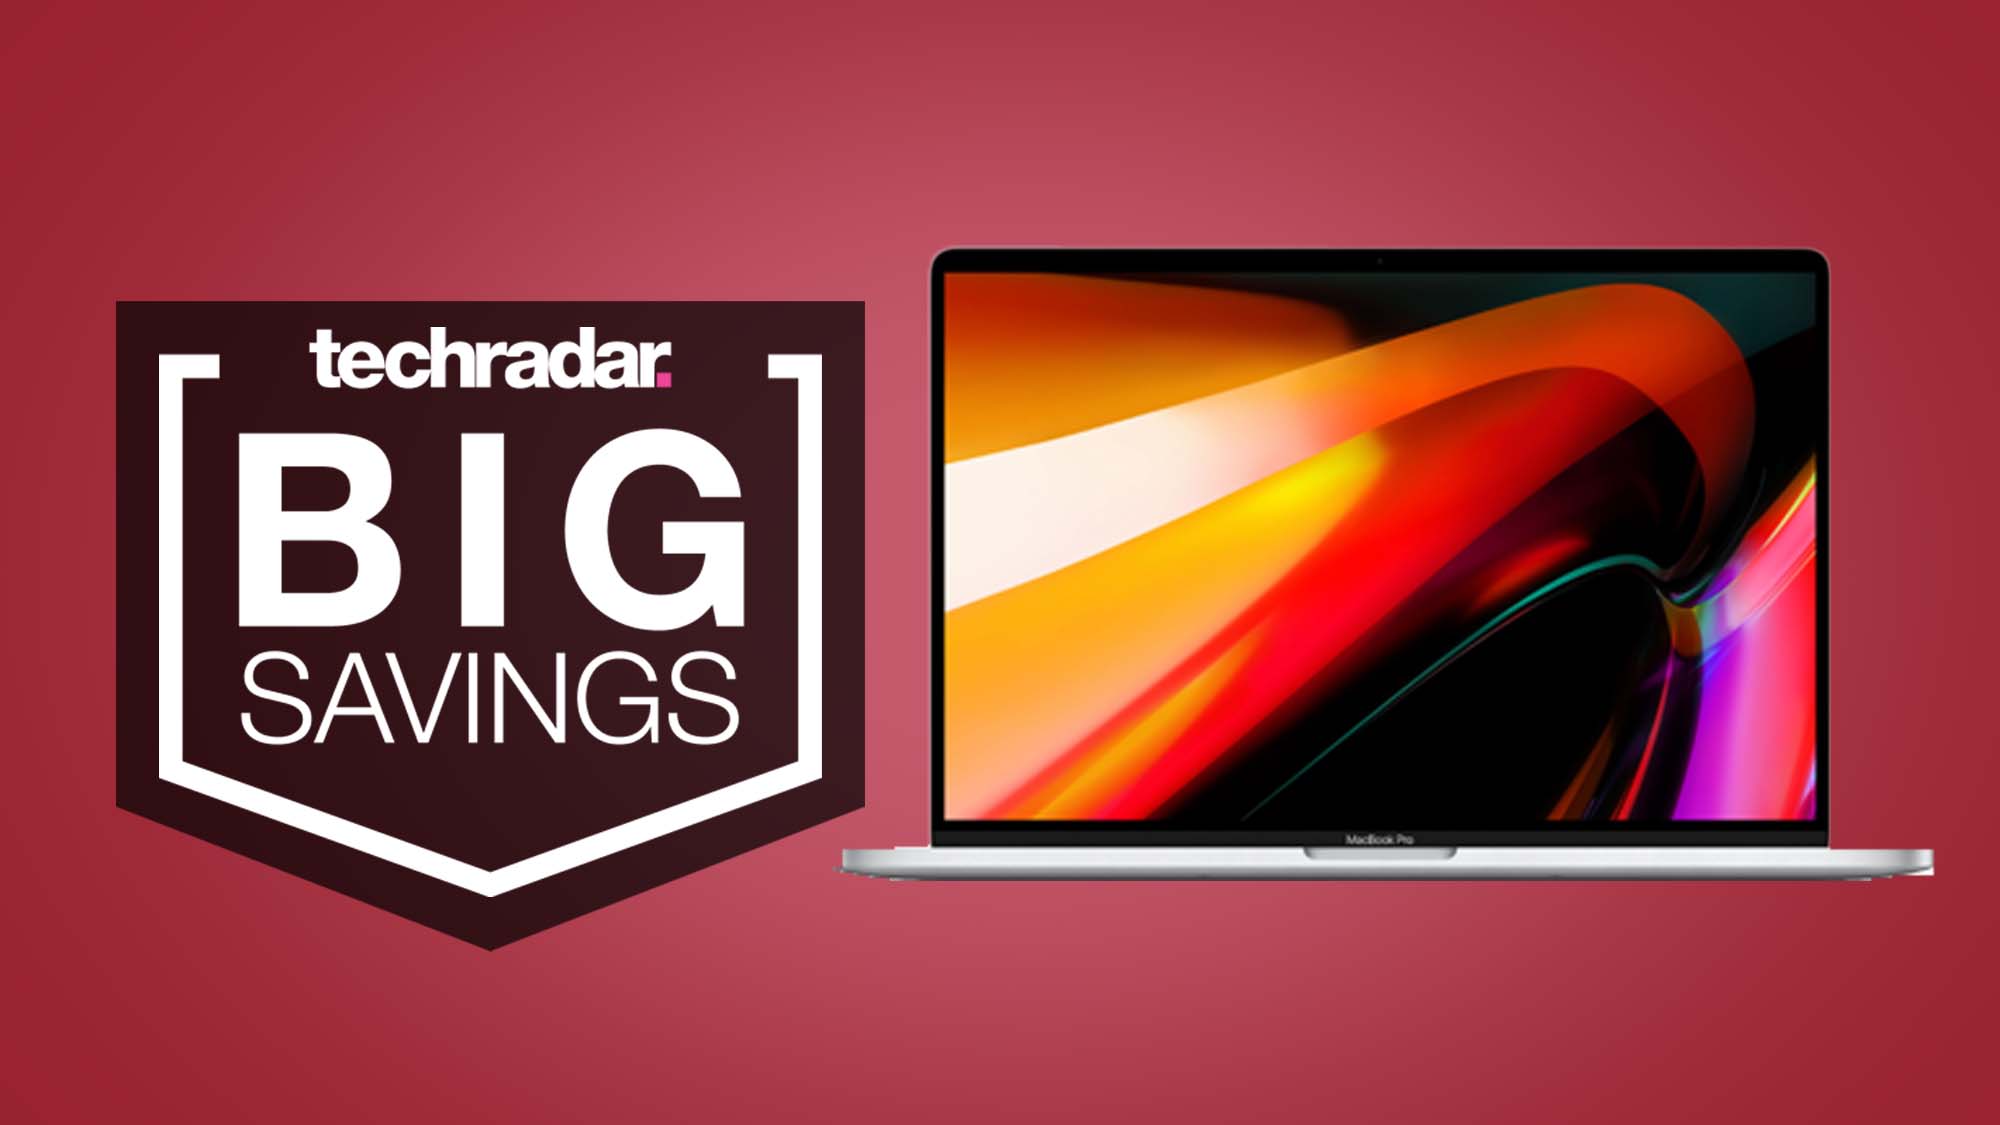 A MacBook Pro 16-inch against a red background with a TechRadar Big Savings badge